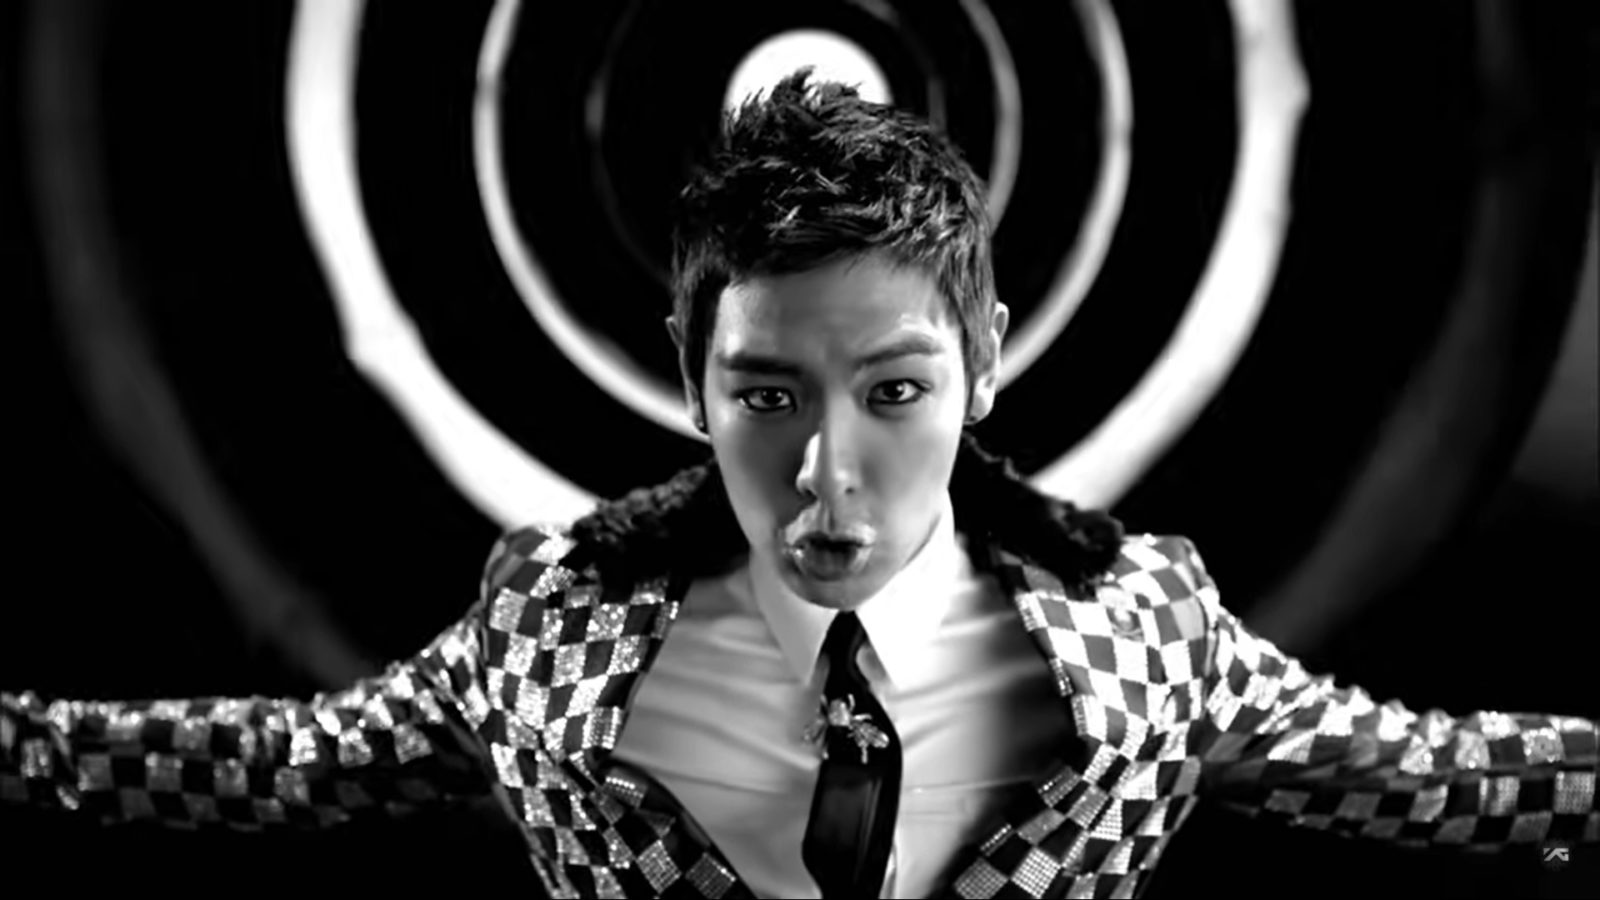 Here are T.O.P of BIGBANG’s 9 most memorable songs